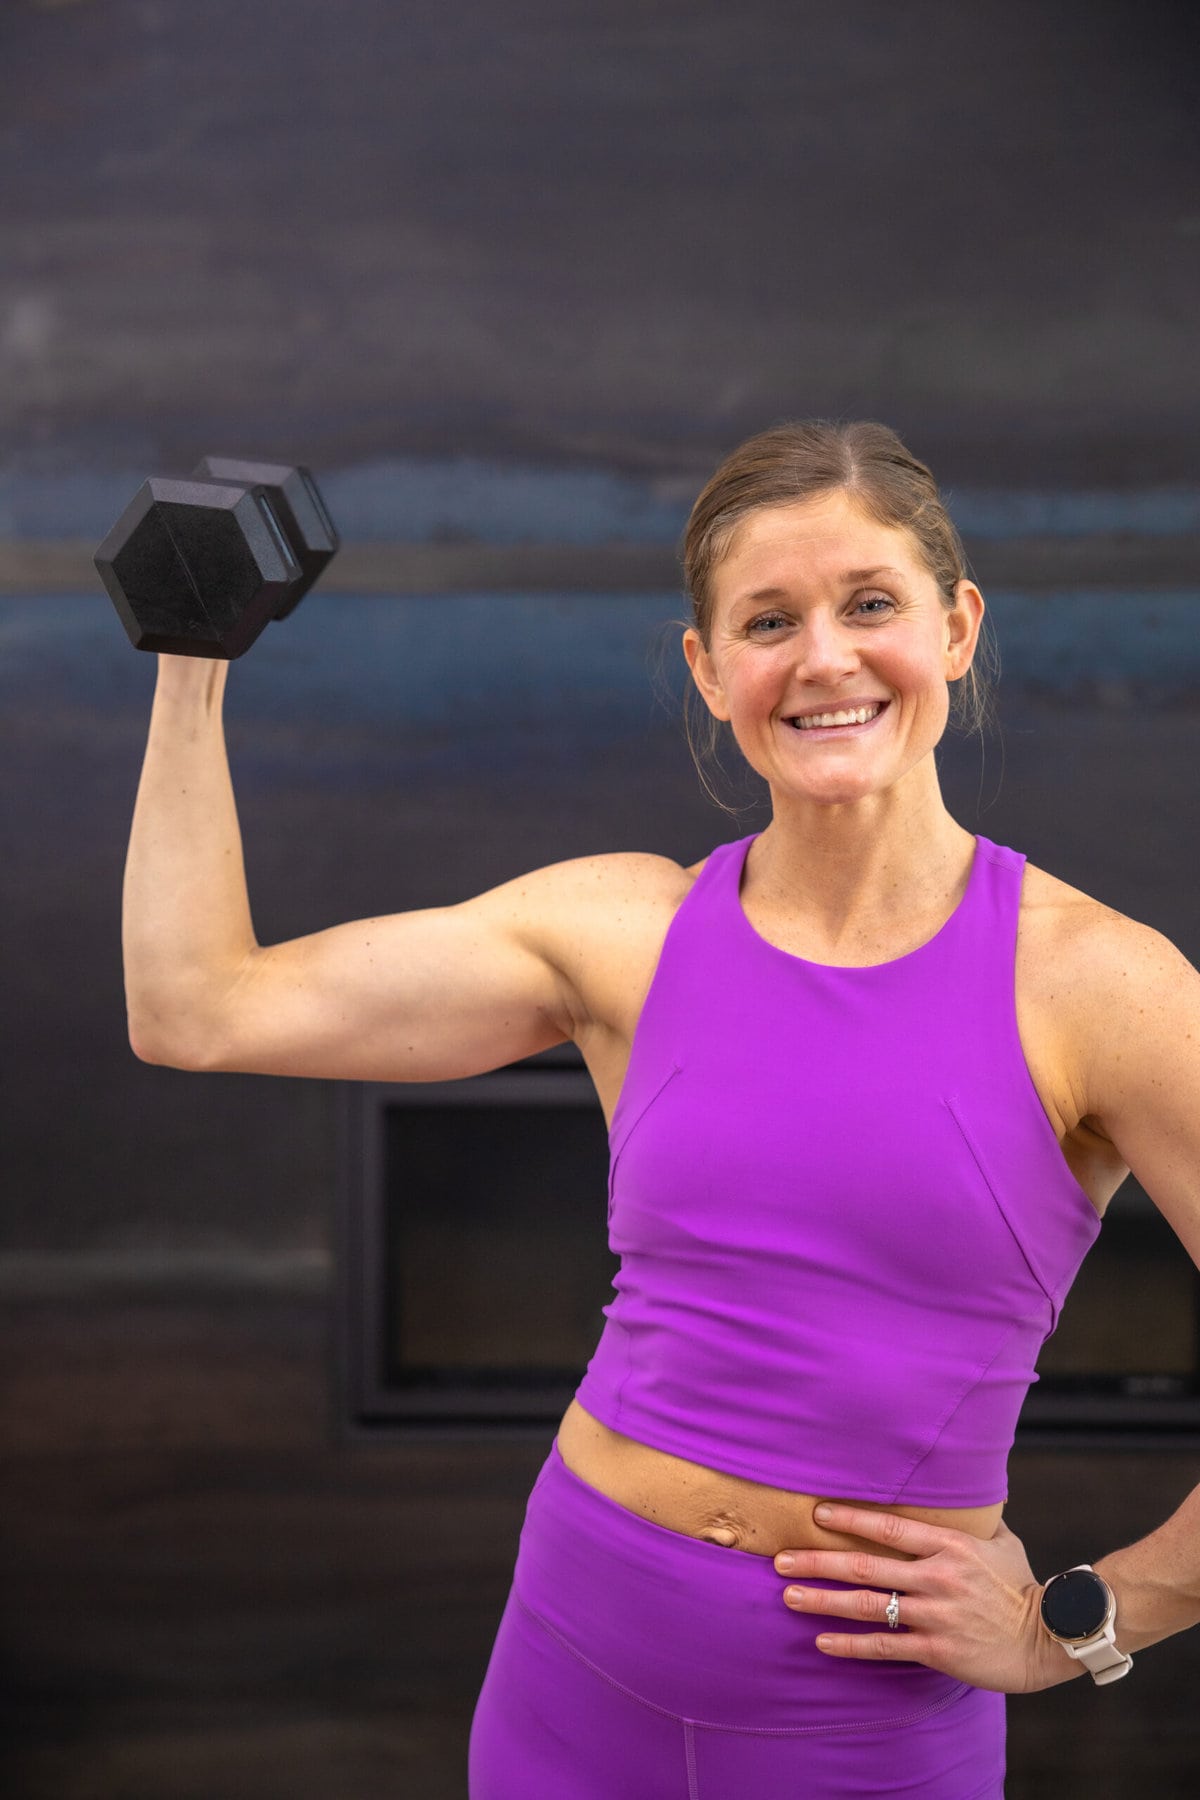 5 Dumbbell Arm Exercises for Toned Arms At Home! - Nourish, Move, Love